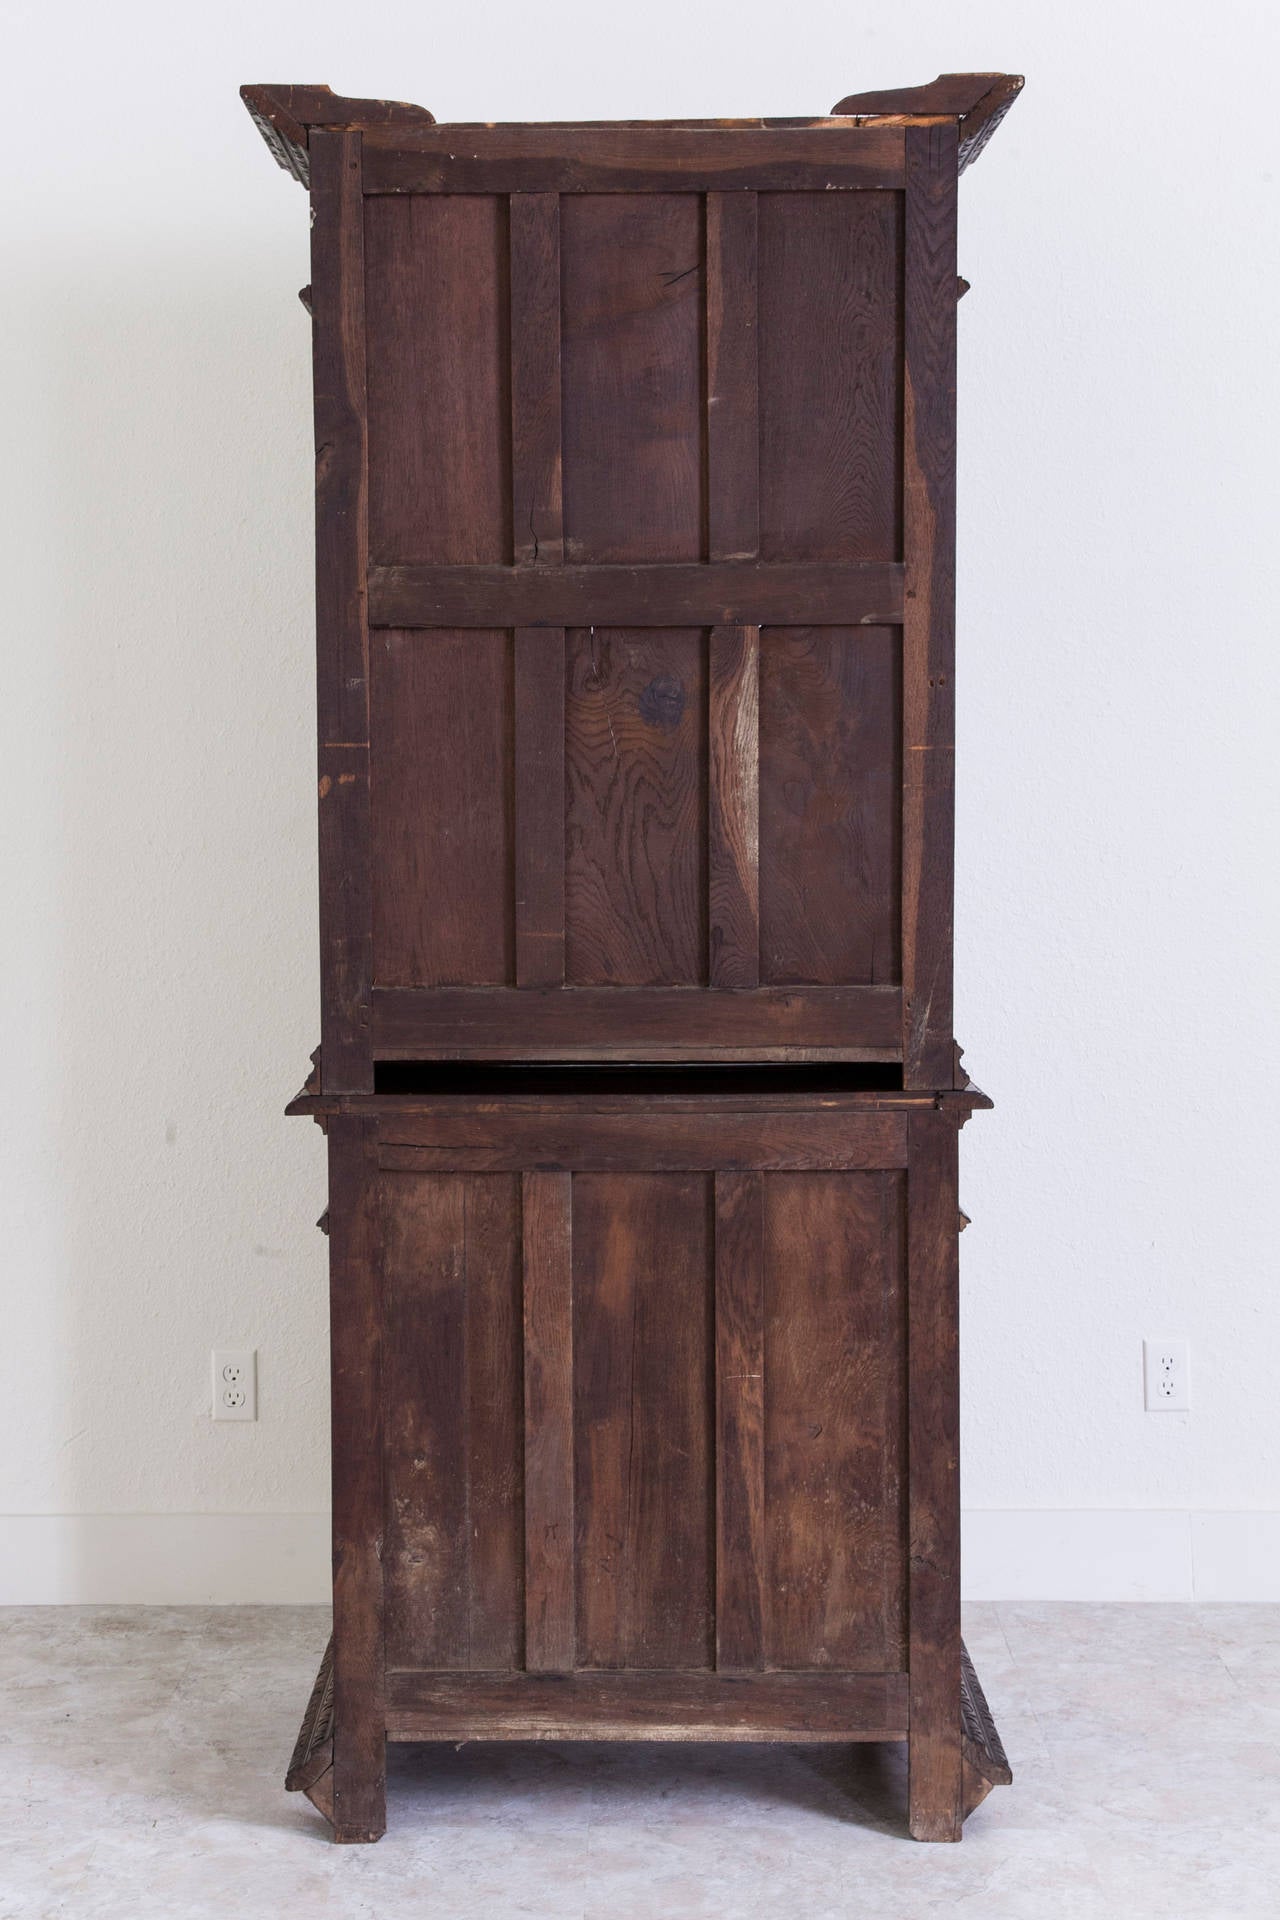 This beautifully hand-carved oak Louis XIII style buffet deux corps features barley twist columns, single door, and single drawer. The carvings on the lower door include an unusual motif of garden attributes with hat, scythe, sheaves of wheat and